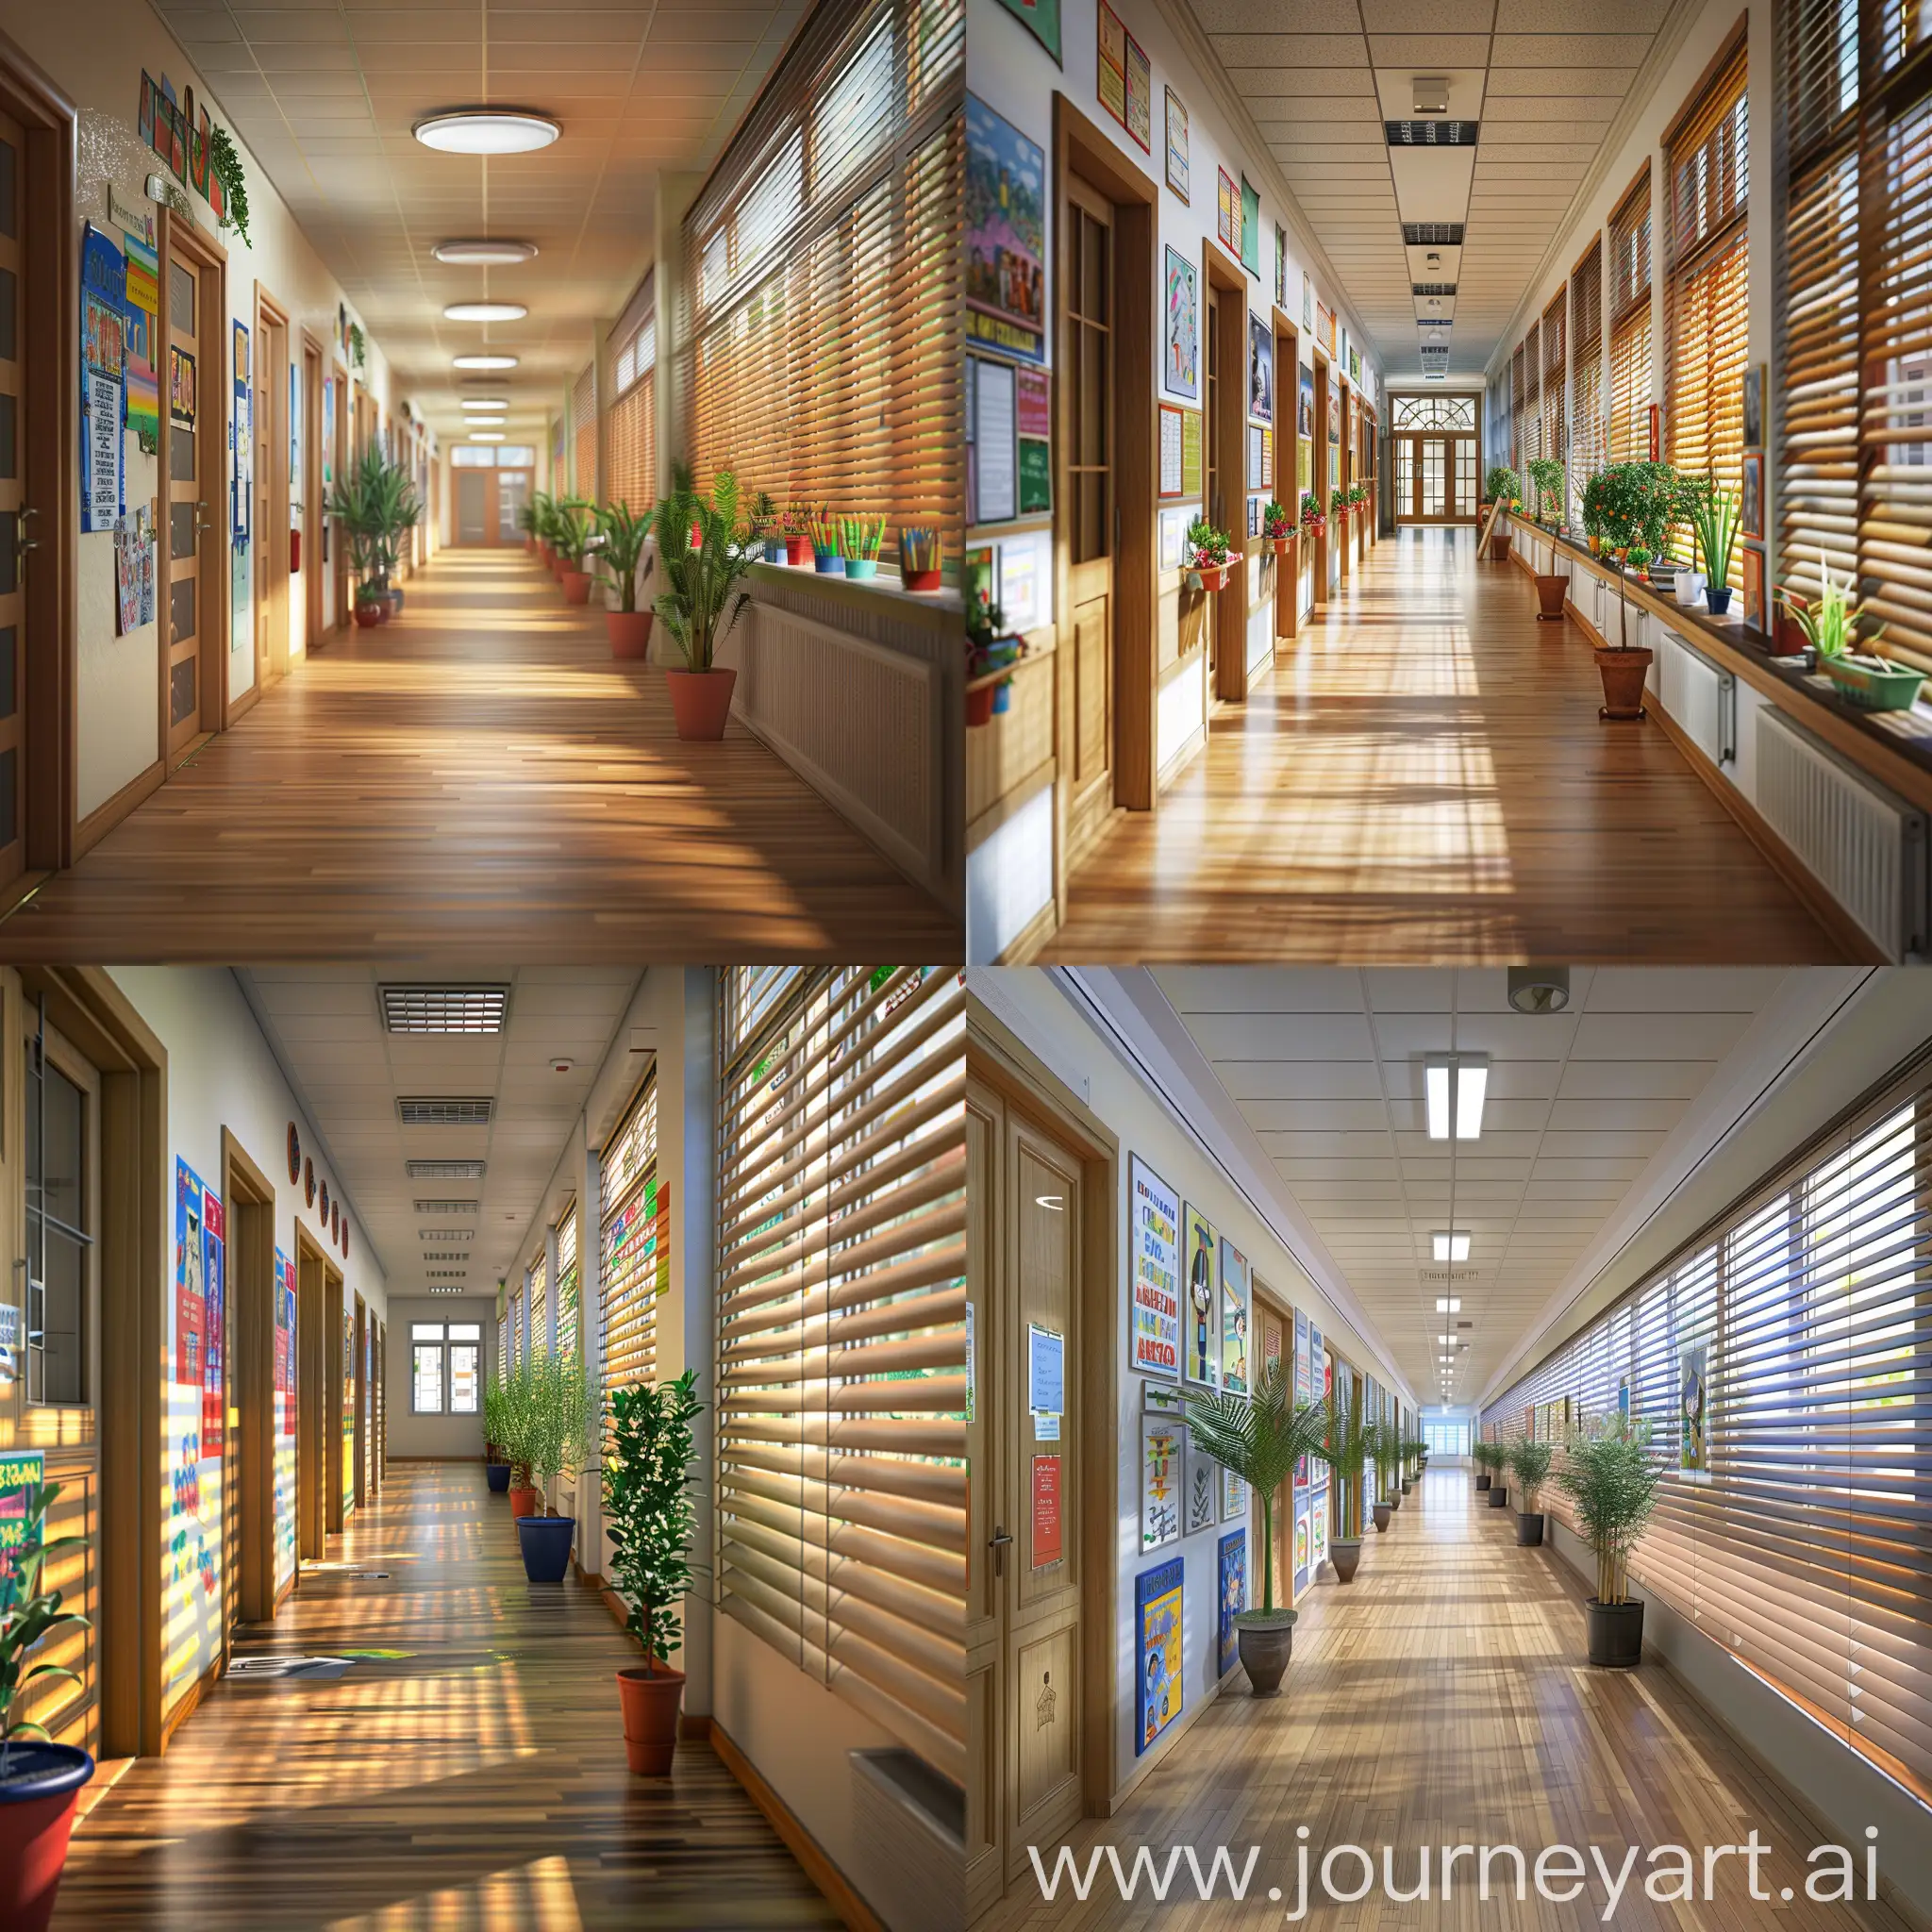 Real-School-Hallway-with-Classrooms-and-Plants